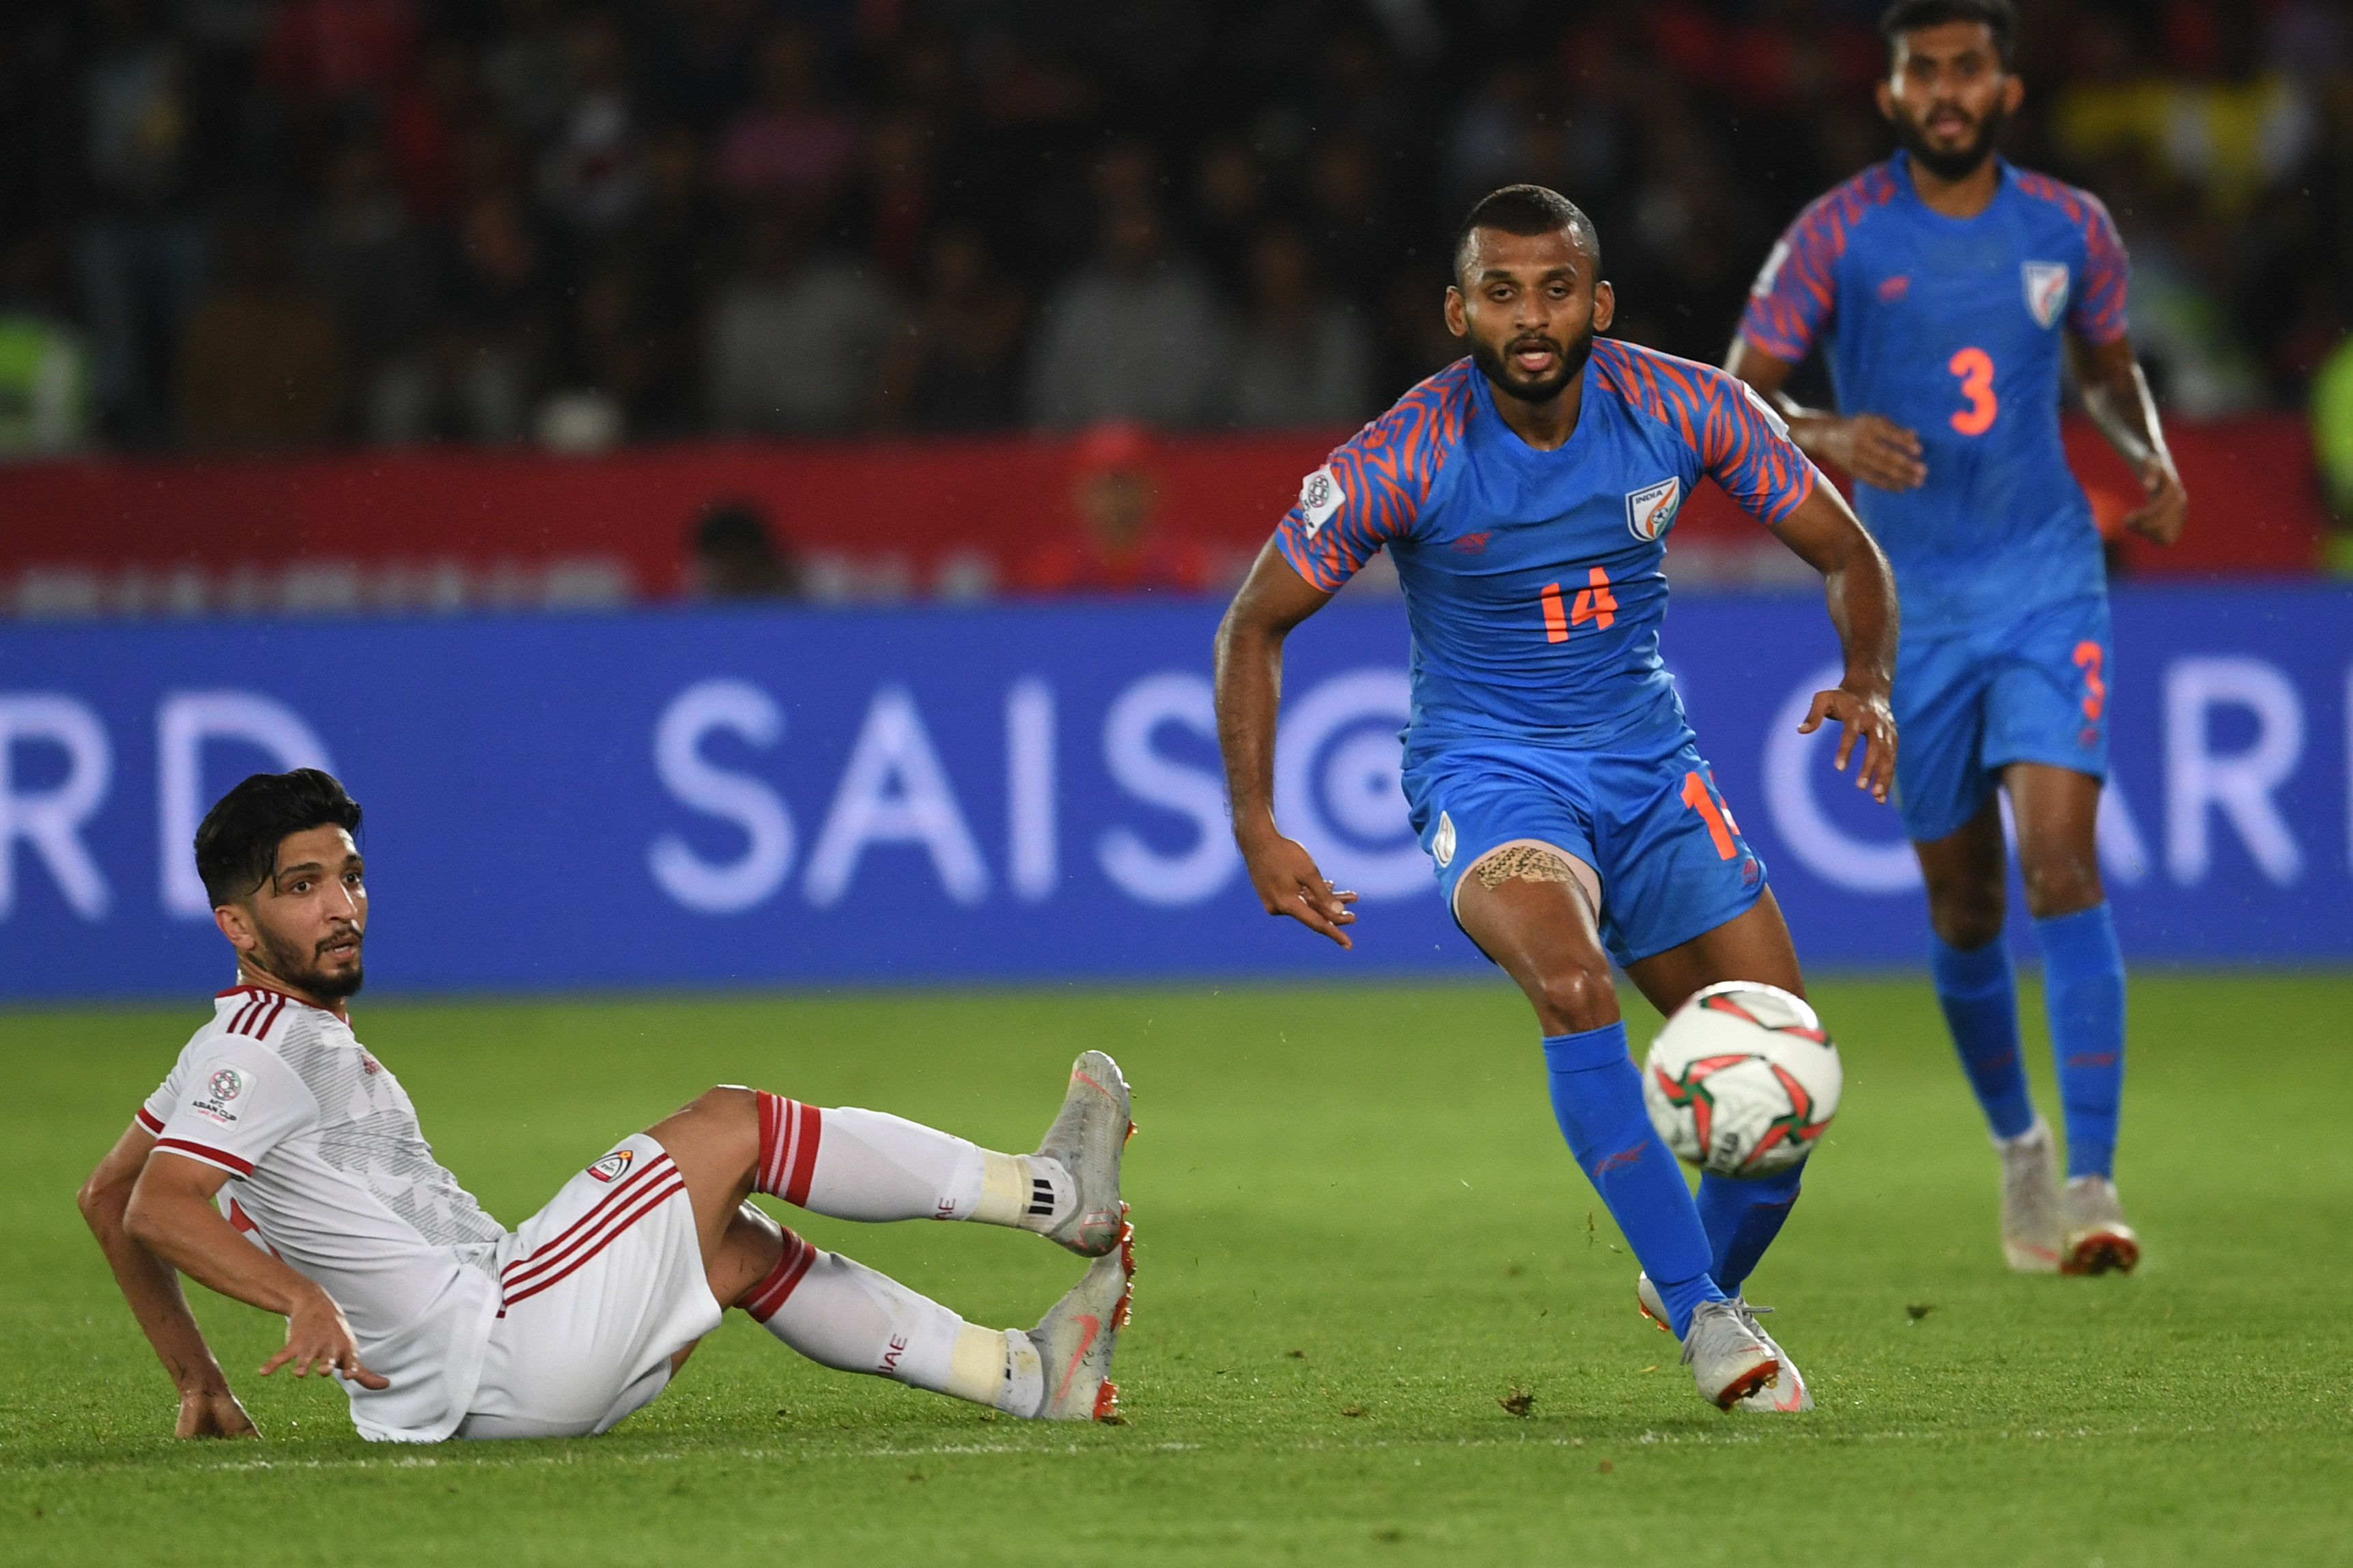 FIFA World Cup Qualifiers | It’s a big regret that I could not make the squad, says Pronay Halder